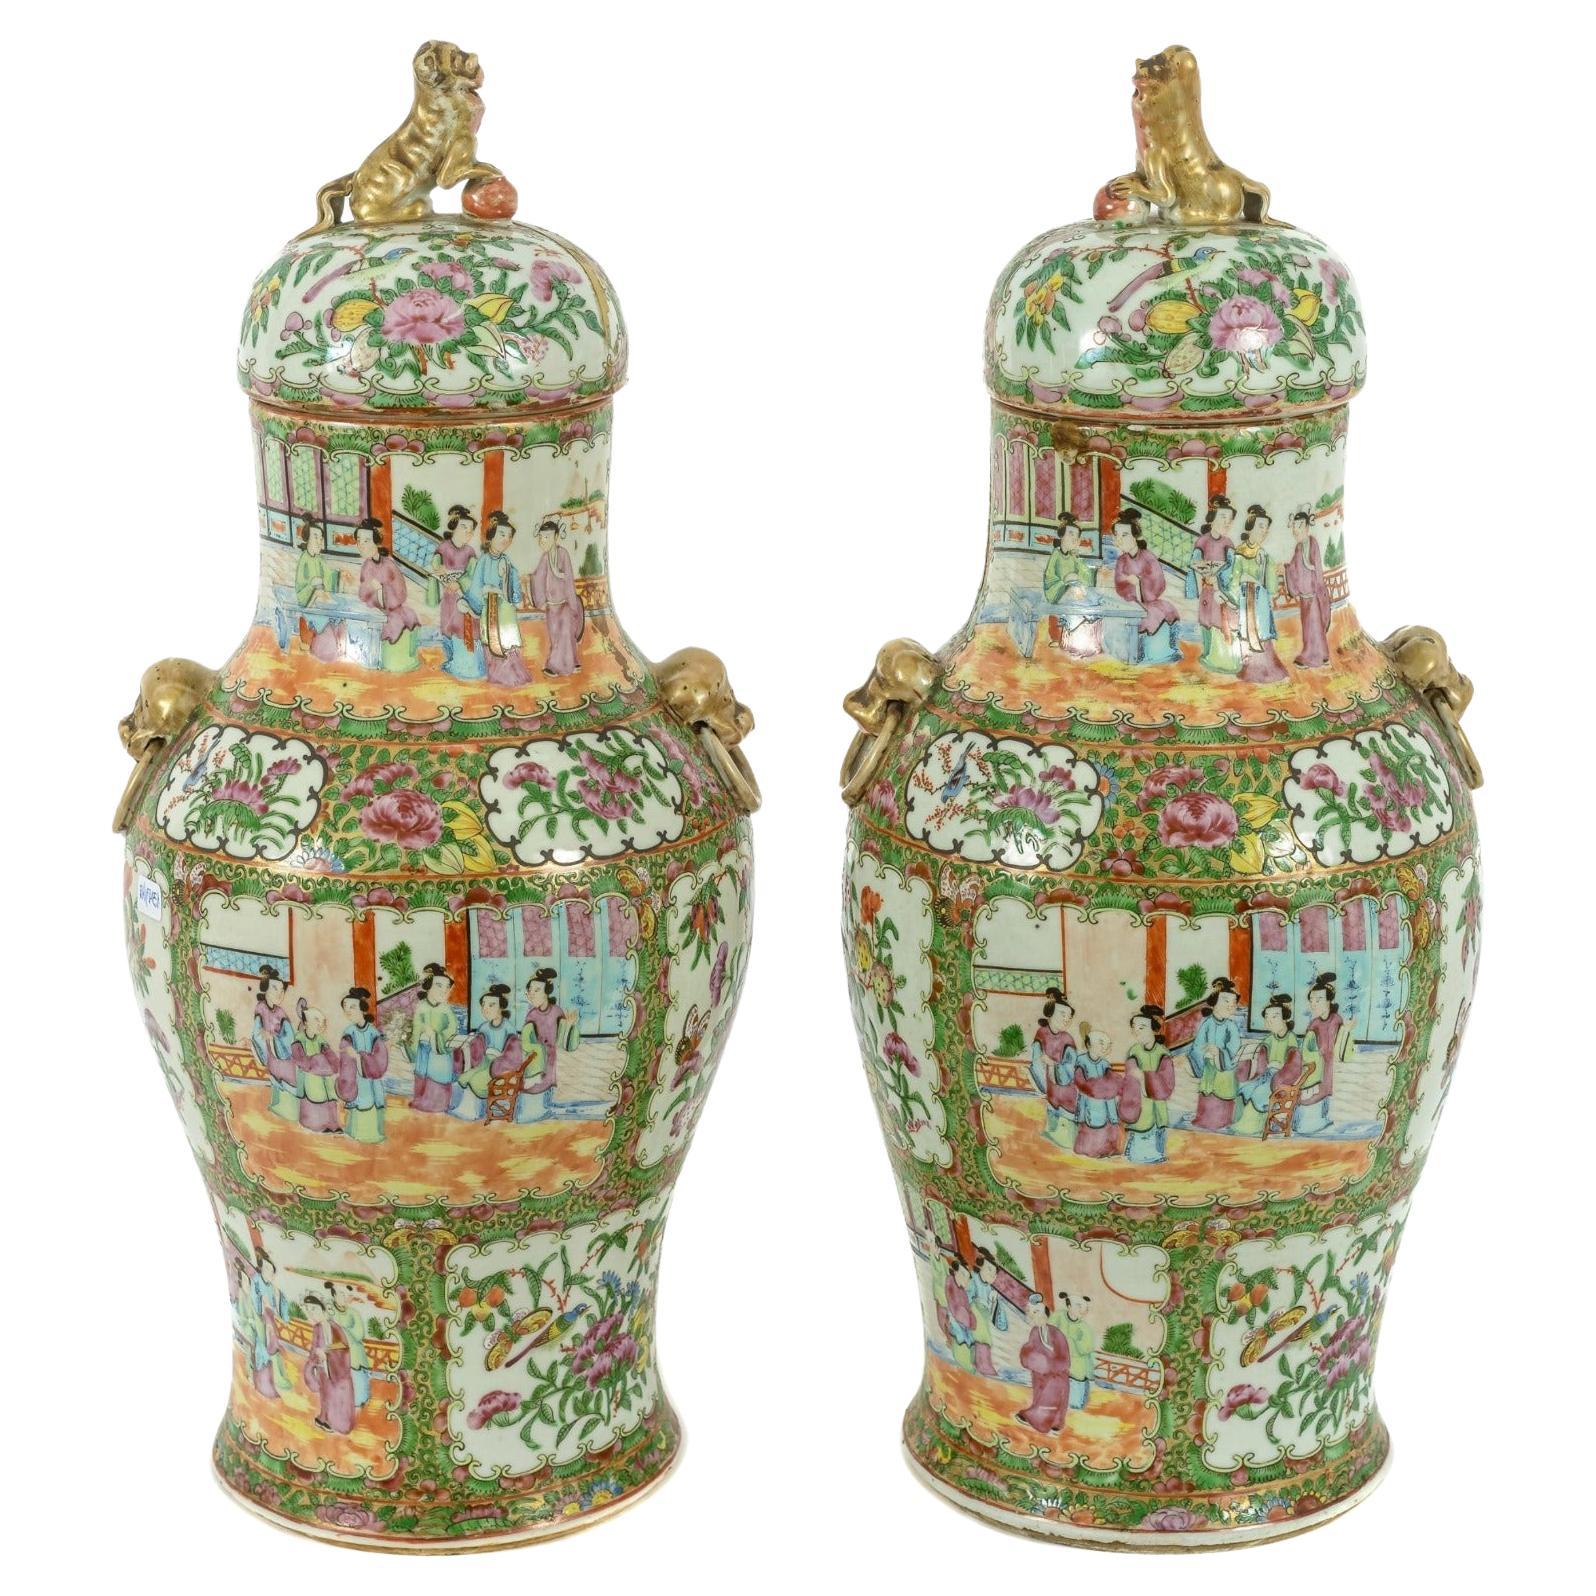 Pair of Porcelain Jars "Rose Family" Cantón Qing Dynasty China 19th Century For Sale